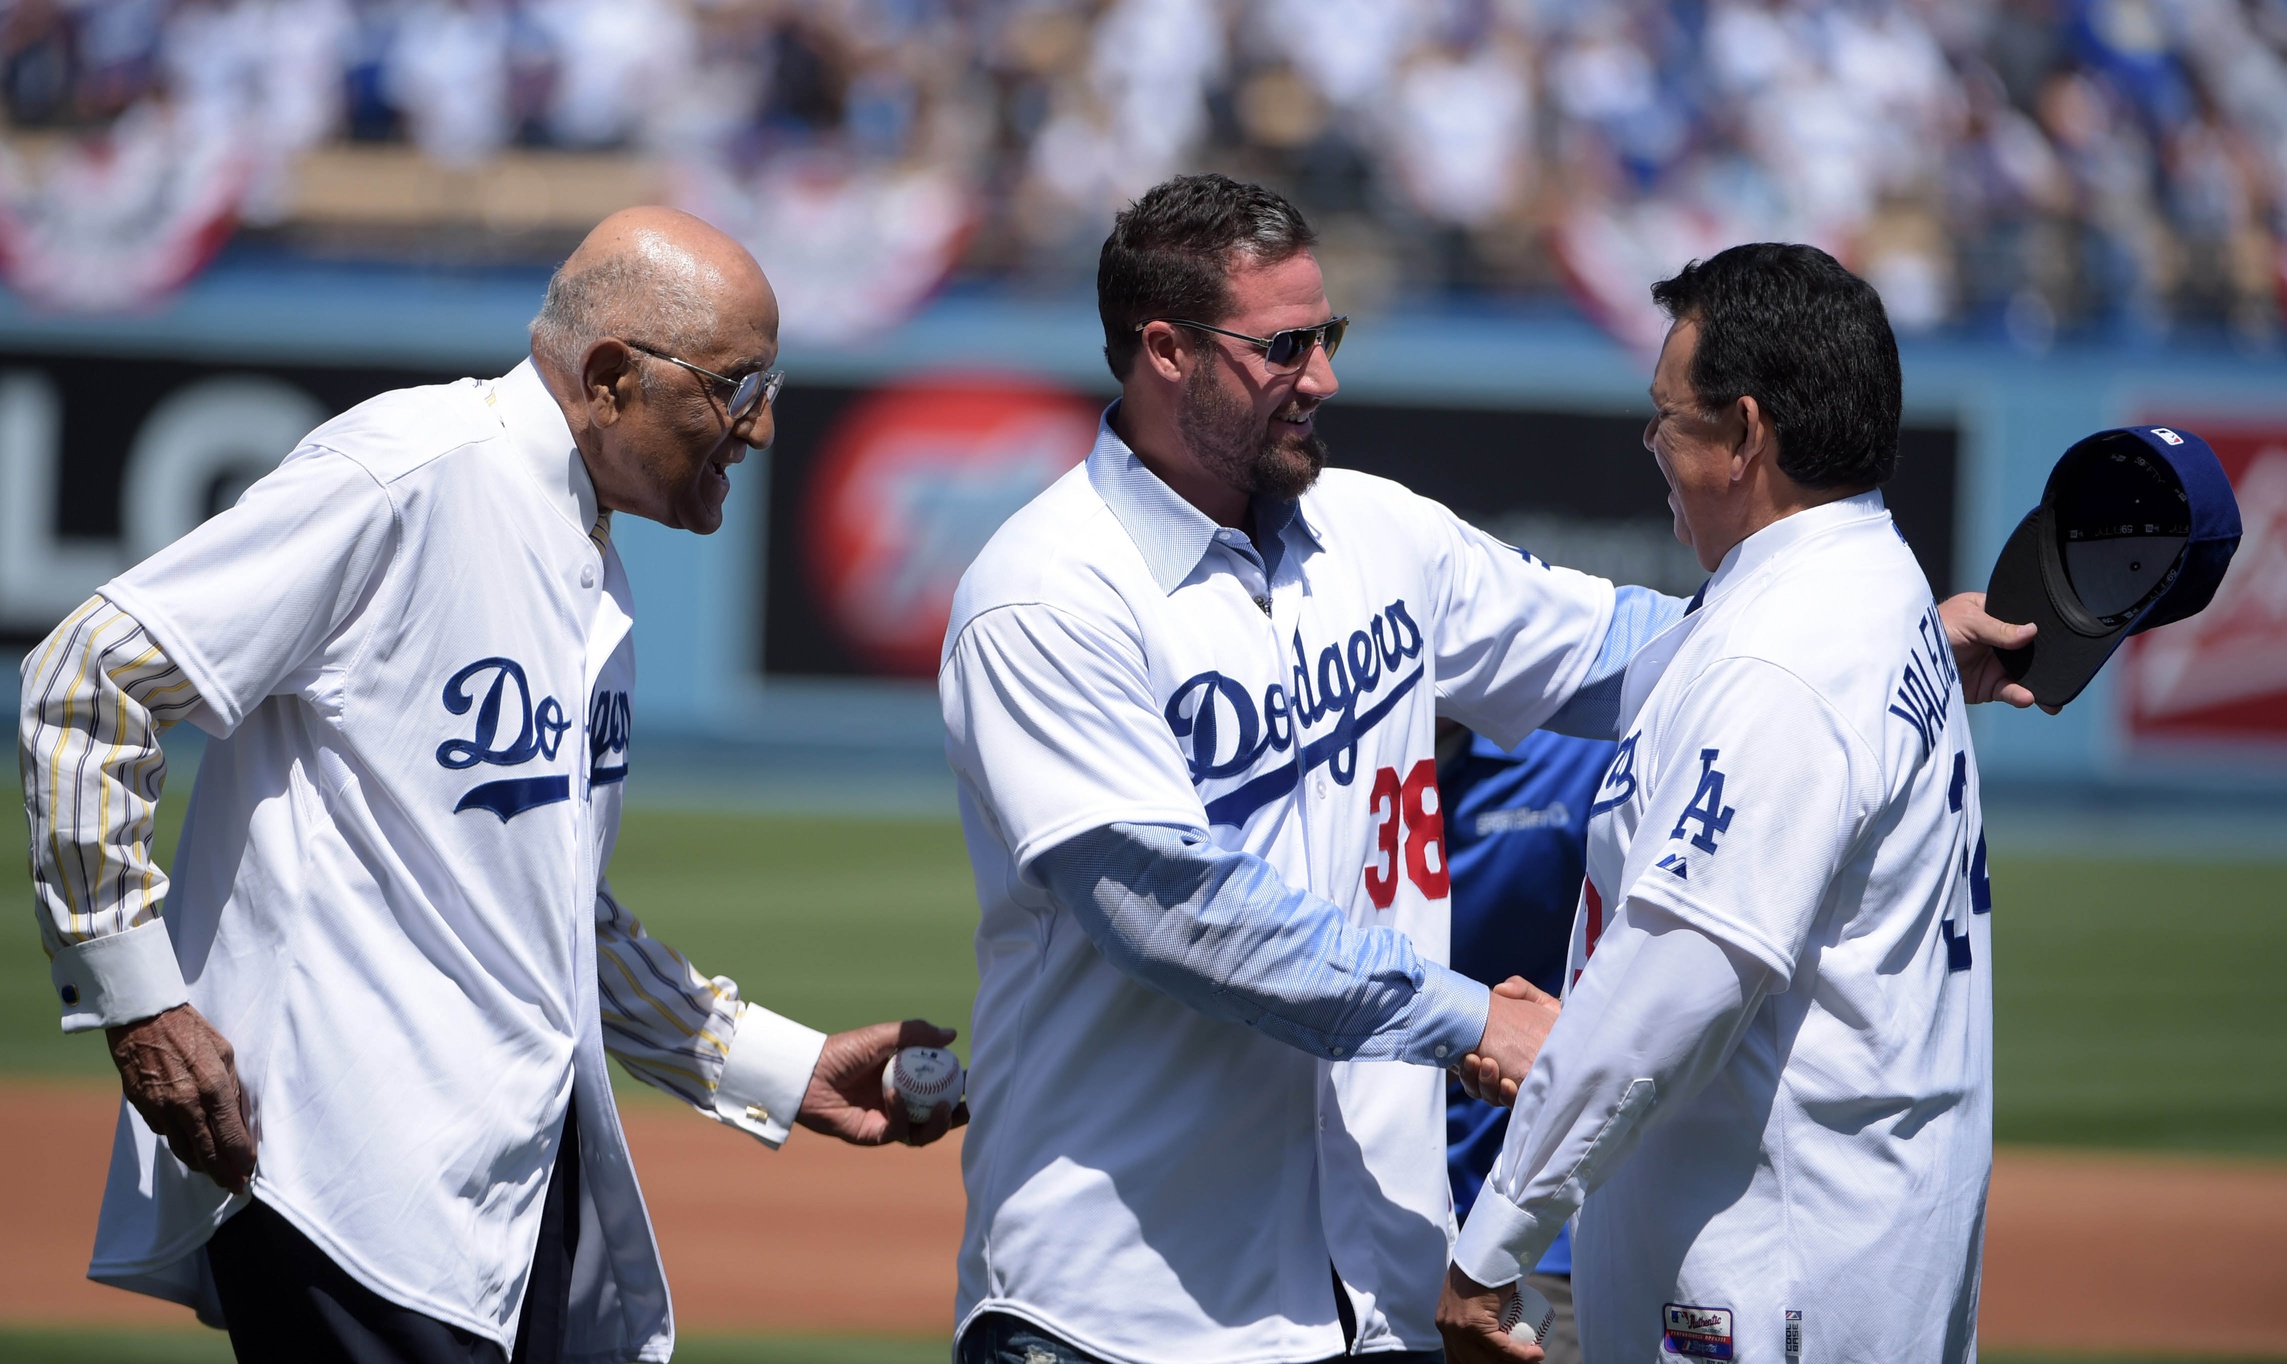 Former Dodgers closer Gagne call it quits at 34 - Sports Illustrated